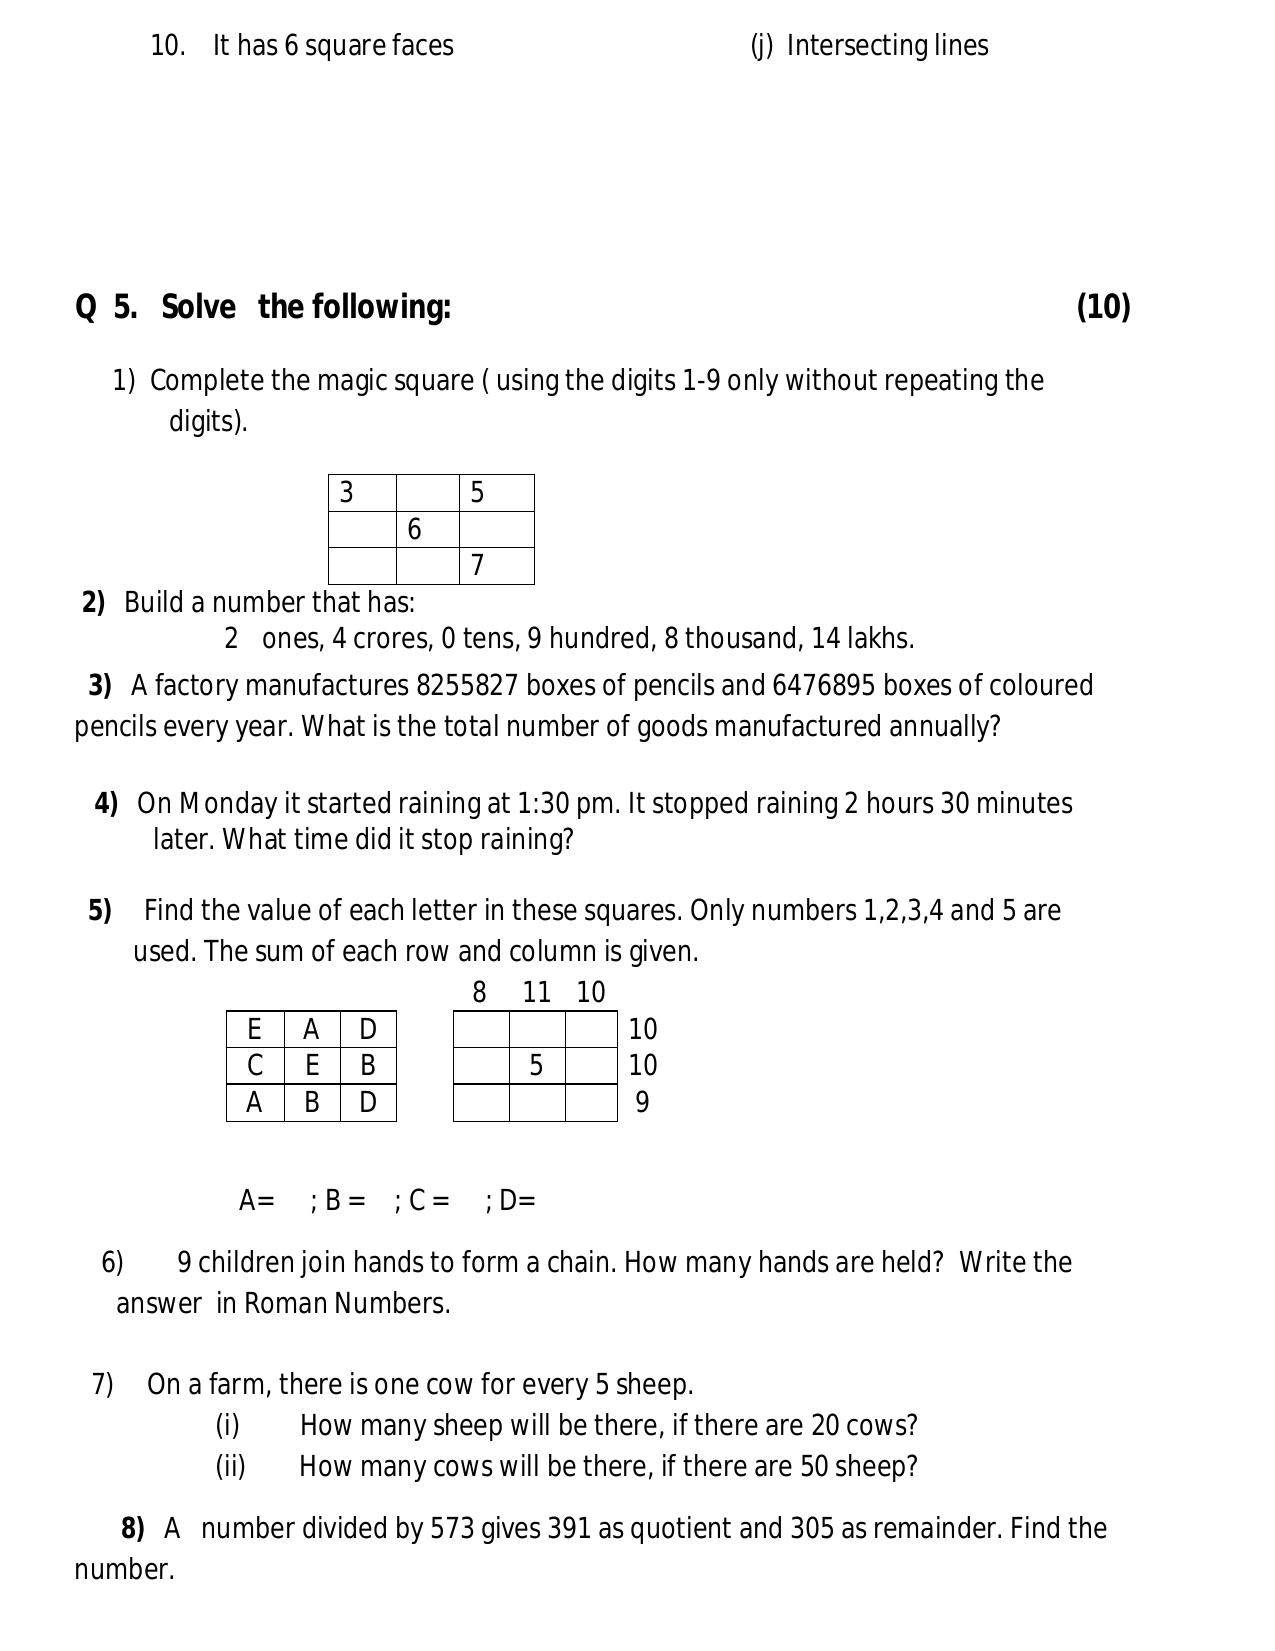 Worksheet for Class 5 Maths Assignment 16 - Page 7